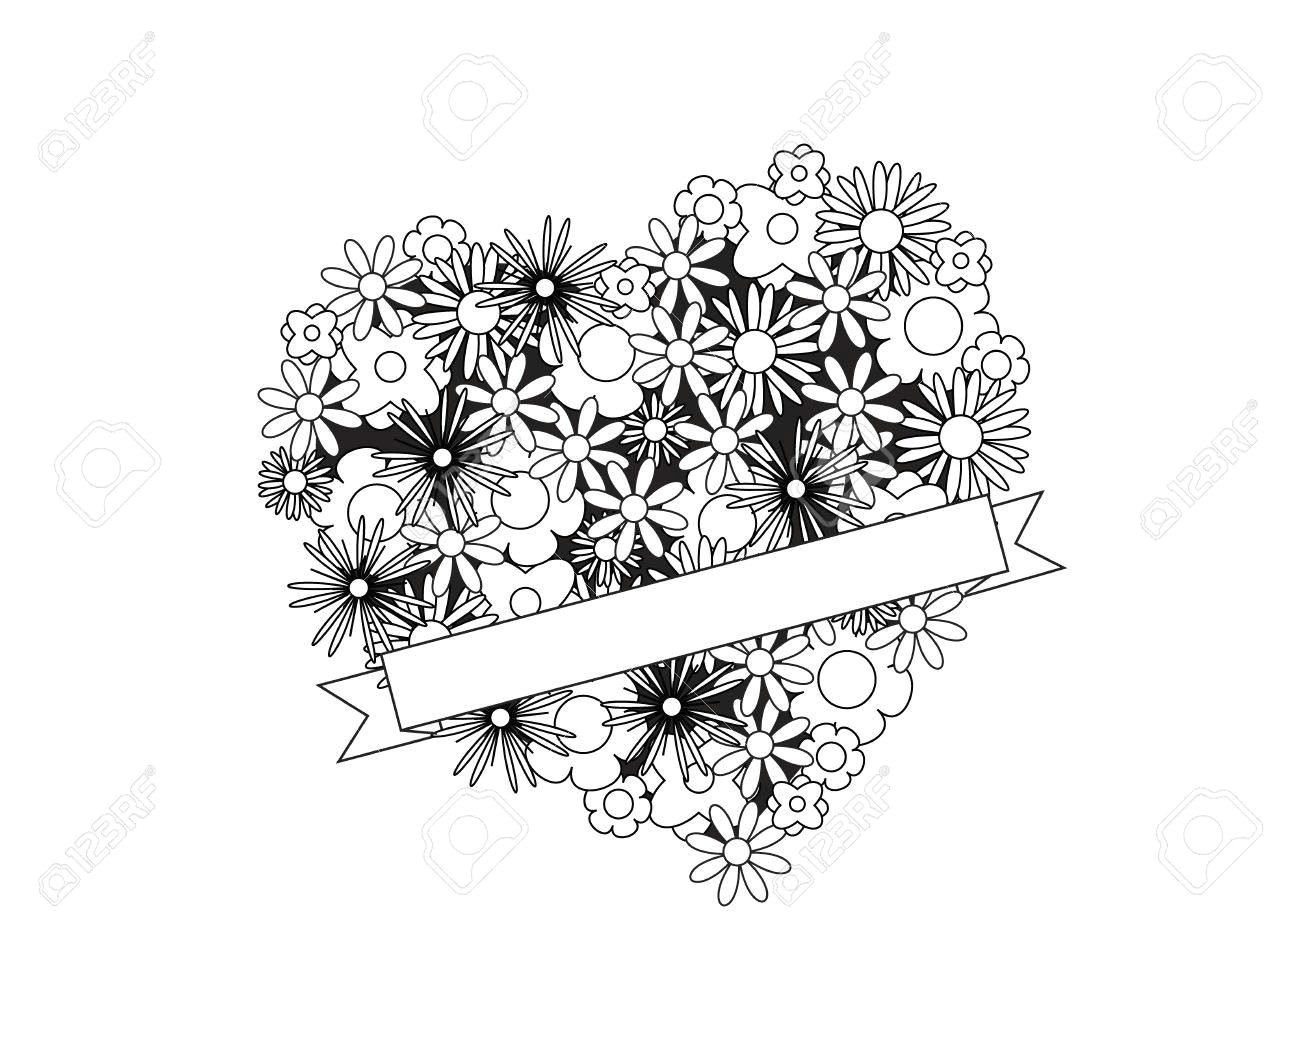 Easy Drawings for Adults Coloring Page for Adult Od Kids Simple Floral Heart with Ribbon